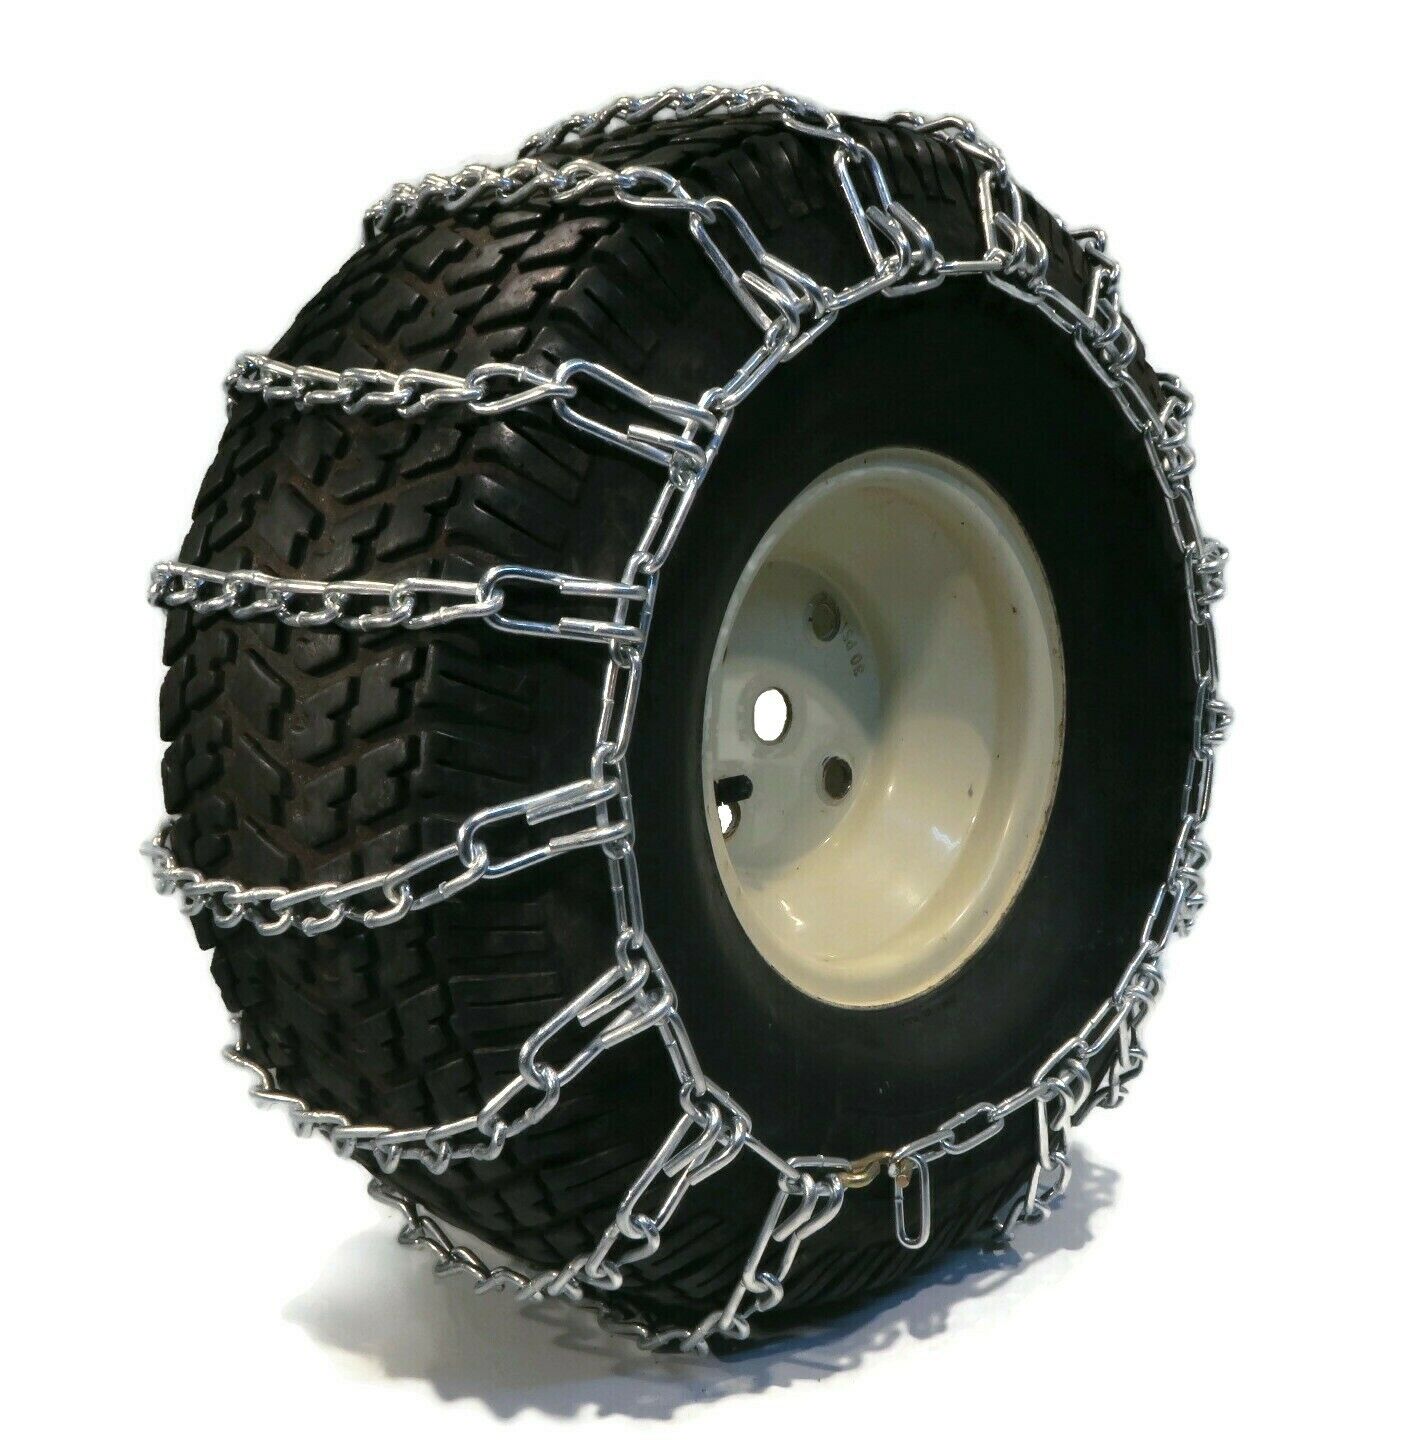 Pair 2 Link Tire Chains 26x12-12 for John Deere Lawn Mower Tractor Rider - image 3 of 6